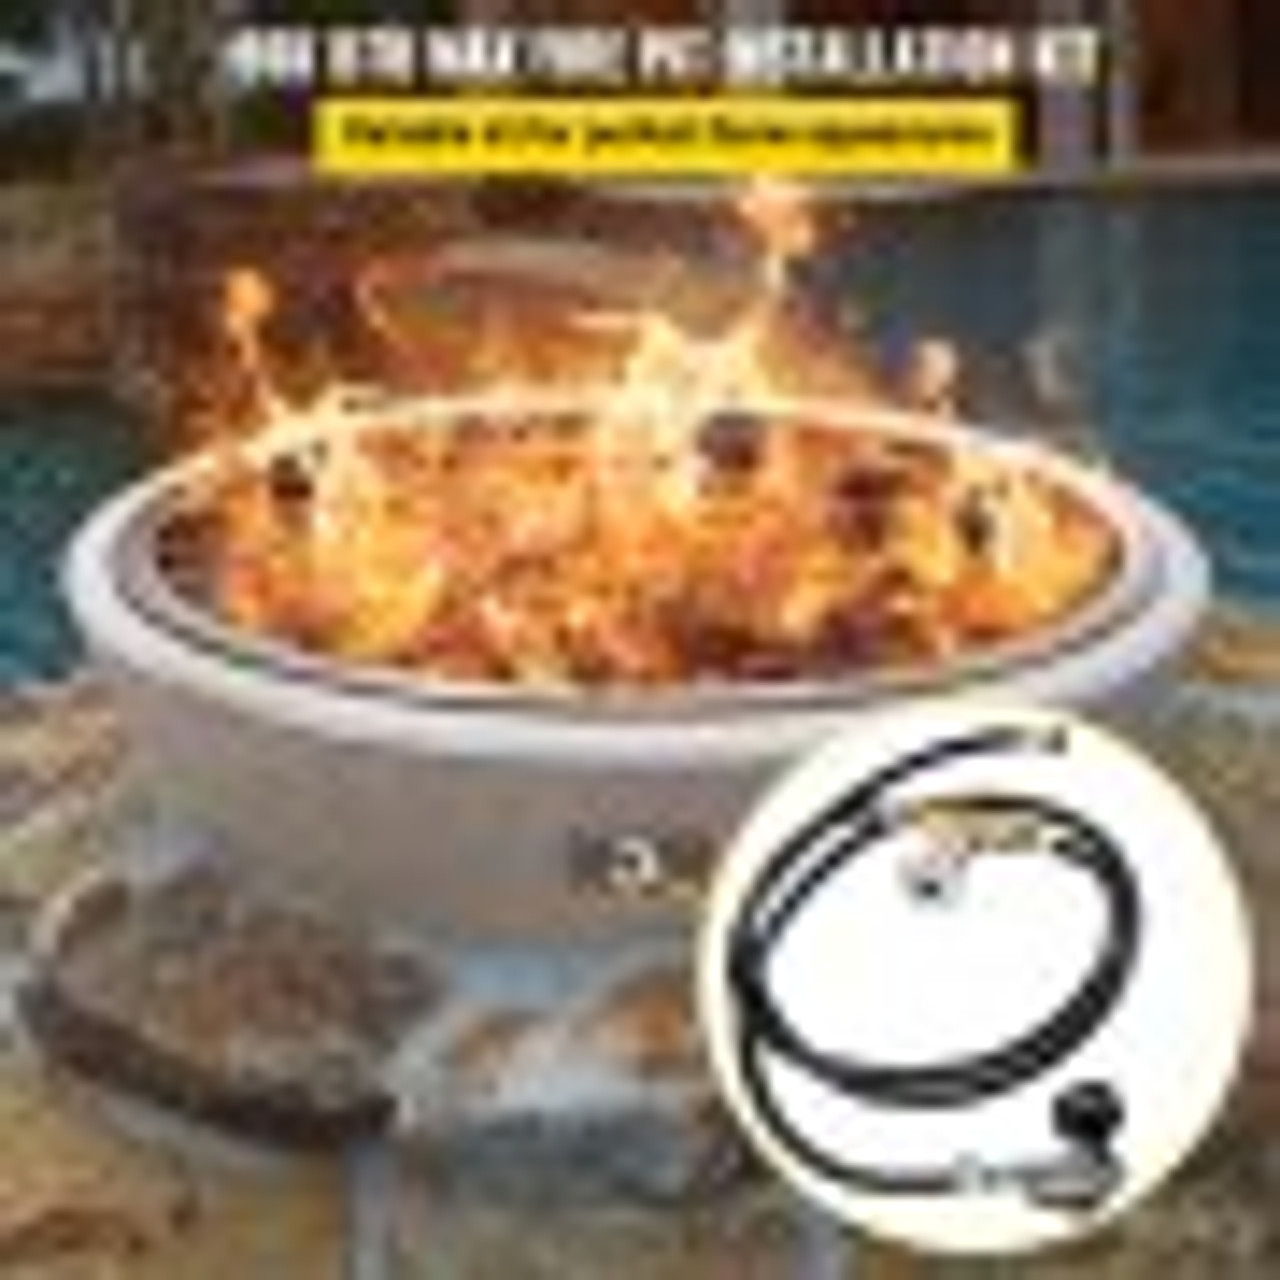 Fire Pit Installation Kit, 90K BTU Max Propane Fire Pit Hose Kit, CSA Certified Propane Connection Kit, Gas Mixer Regulator with 1/2" Chrome Key Valve for Propane Connection